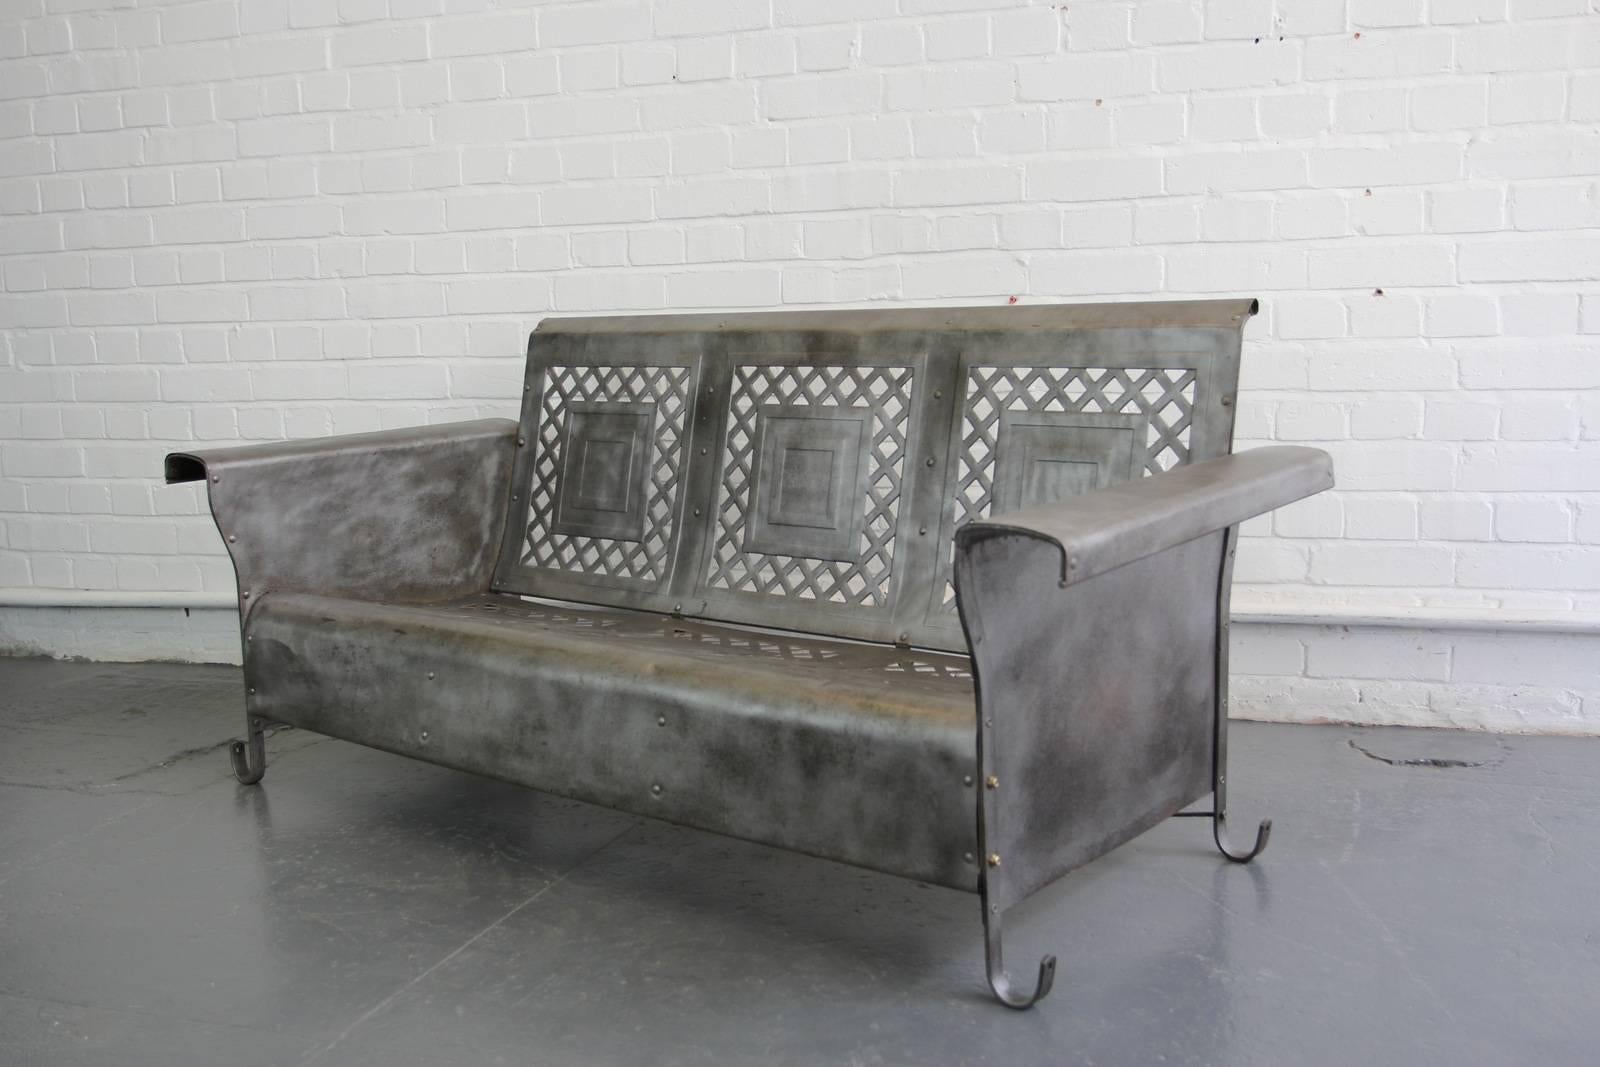 Art Deco Steel Porch Bench by The Bunting Glider Co., circa 1930s